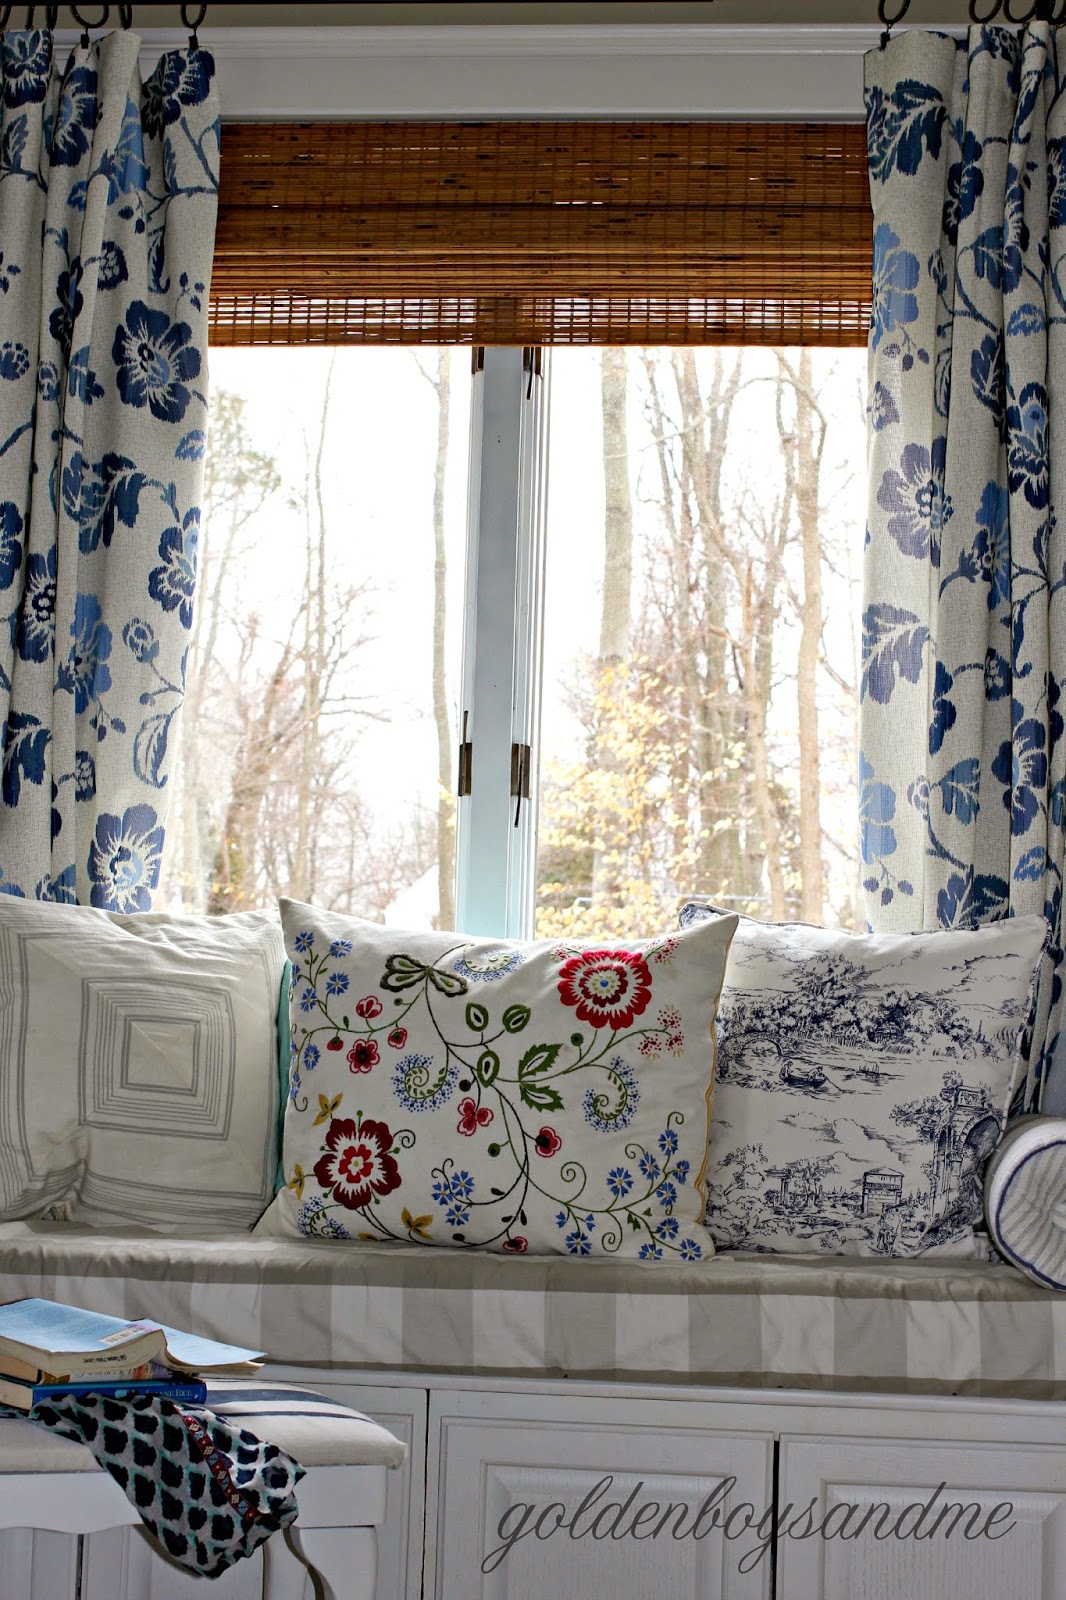 DIY master bedroom window seat made with upper kitchen cabinets-www.goldenboysandme.com